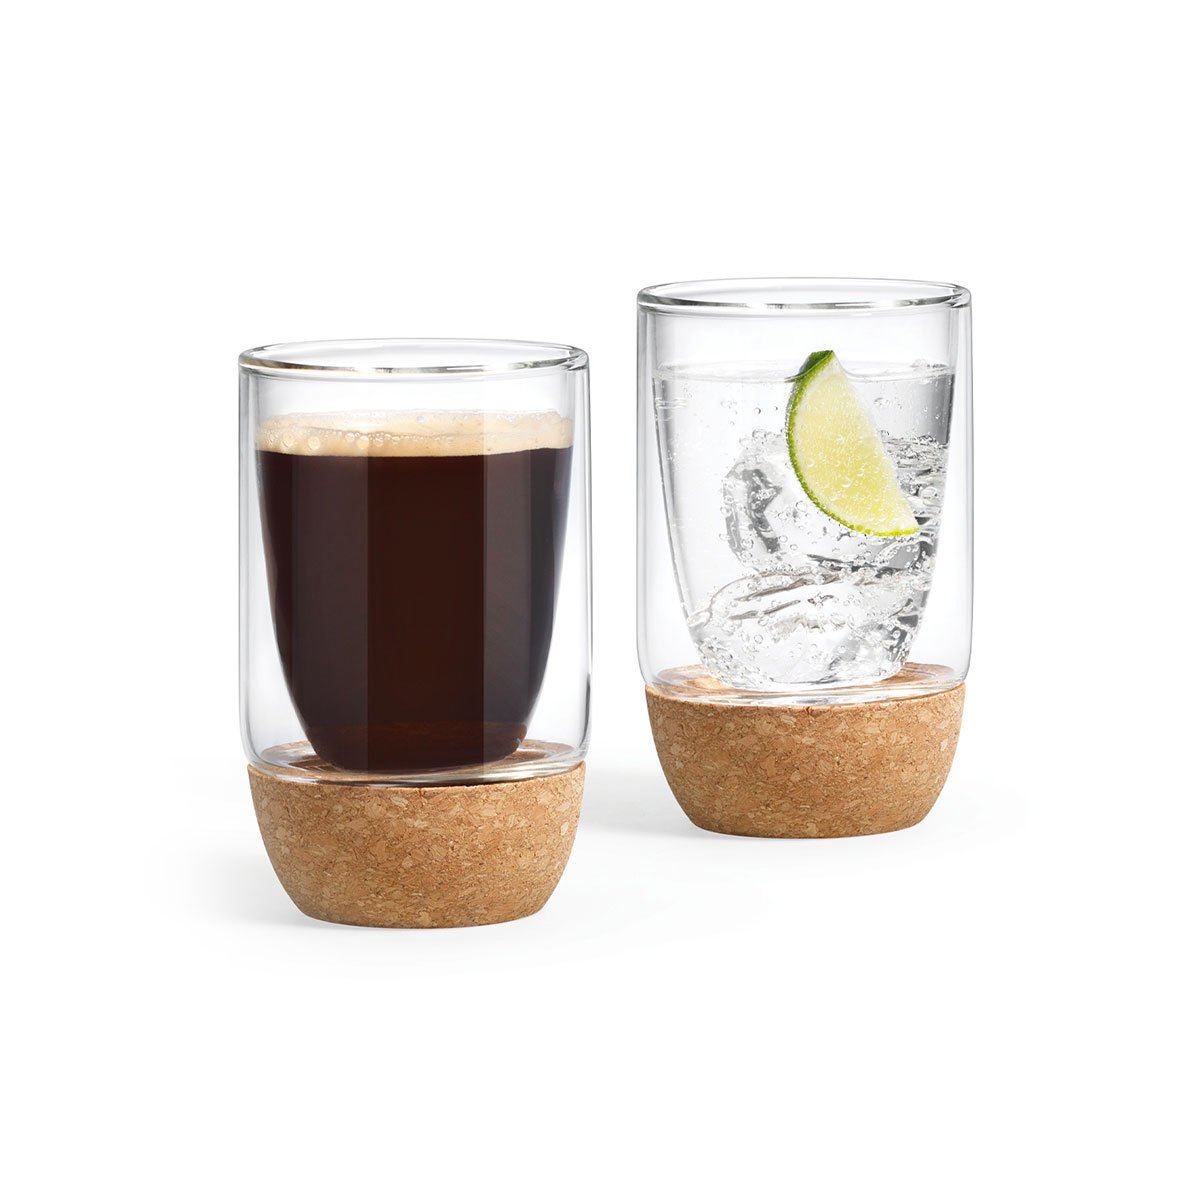 Double-walled glasses, 300ml, 2 units, by Ricardo